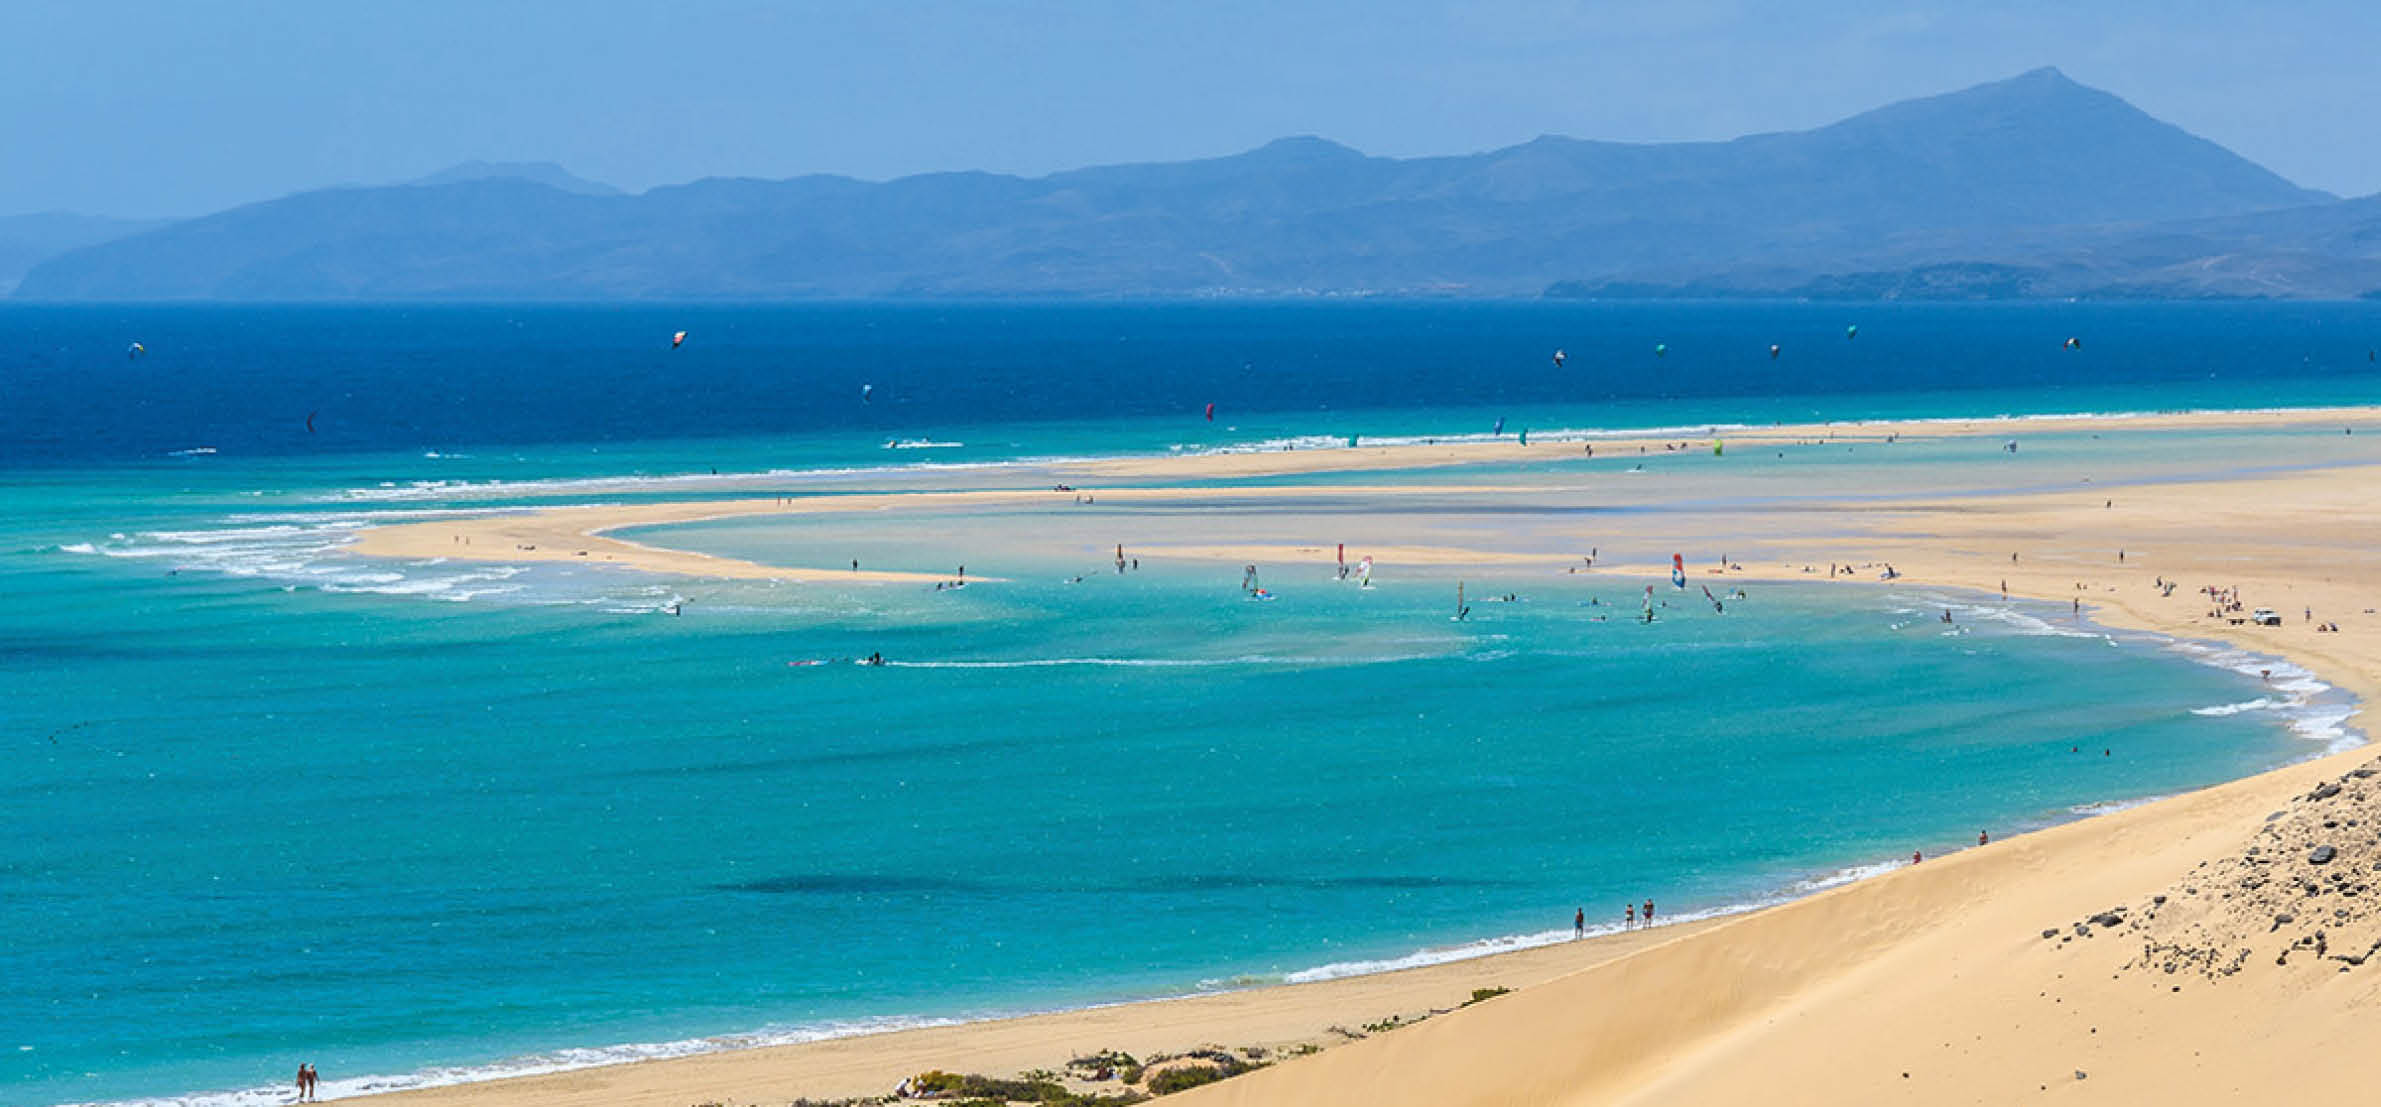 Aerial view of the lagoon on Sotavento Beach in Fuerteventura, Canary Islands, Spain